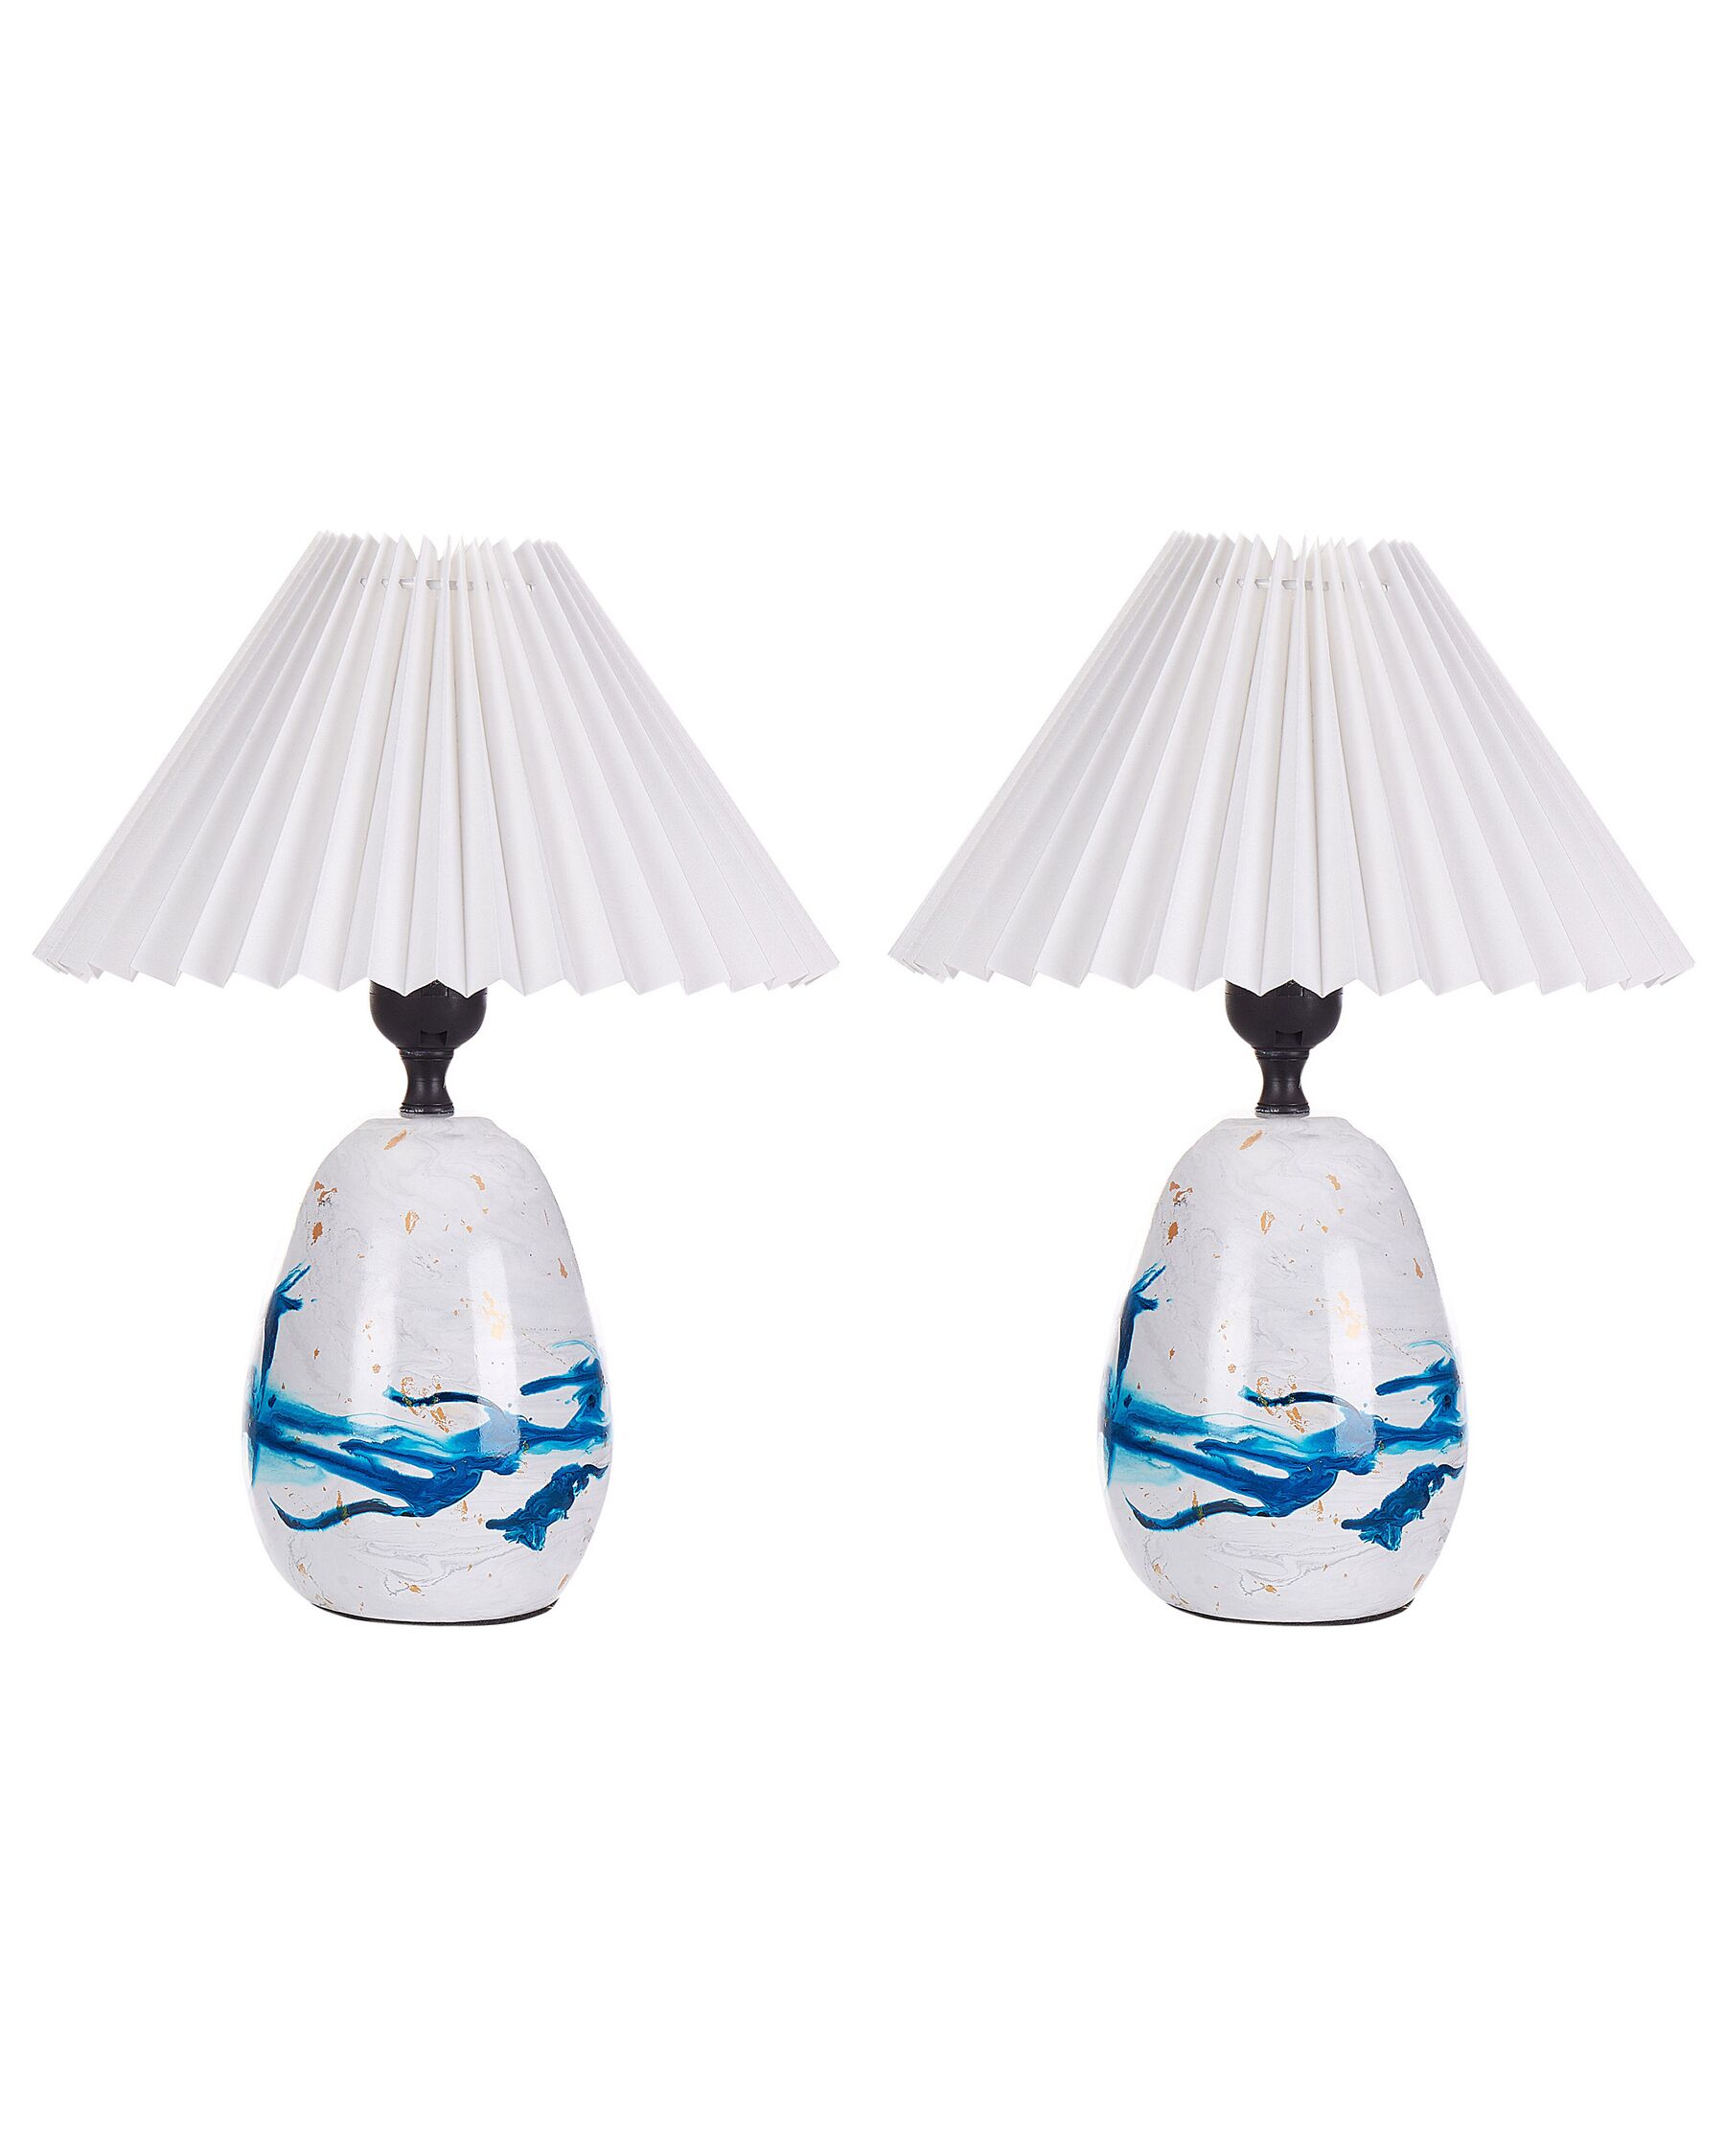 Set of 2 Ceramic Table Lamps White and Blue GENFEL_897996